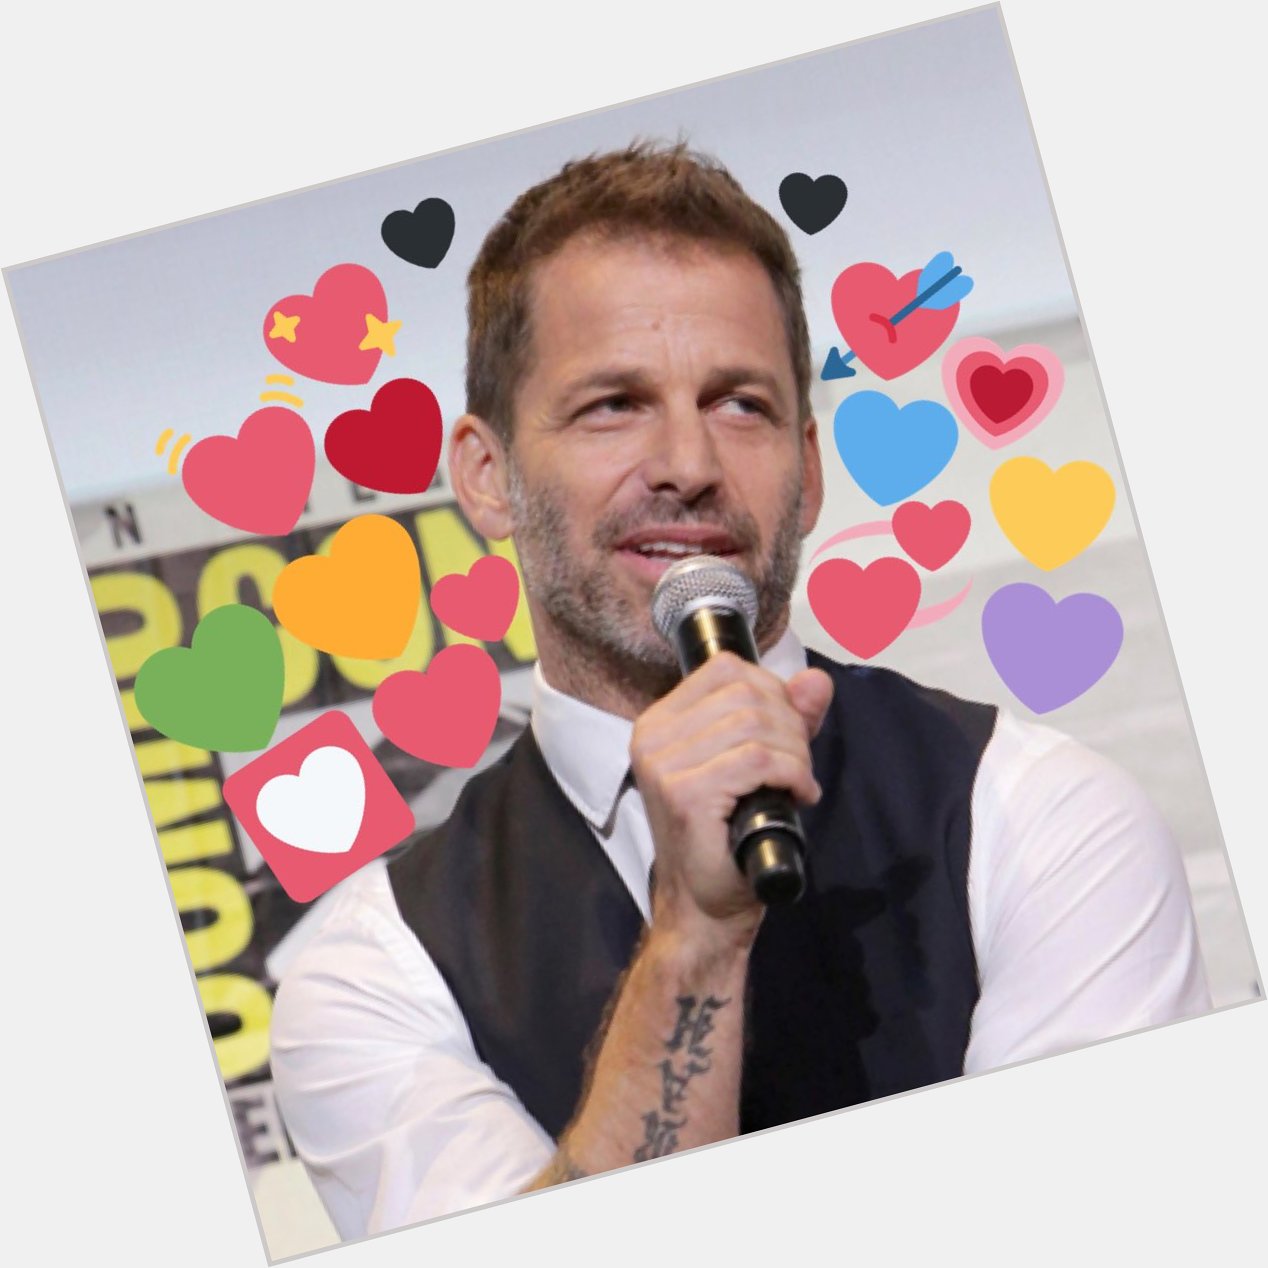 I m a little late but Happy Birthday to my King, Zack Snyder       